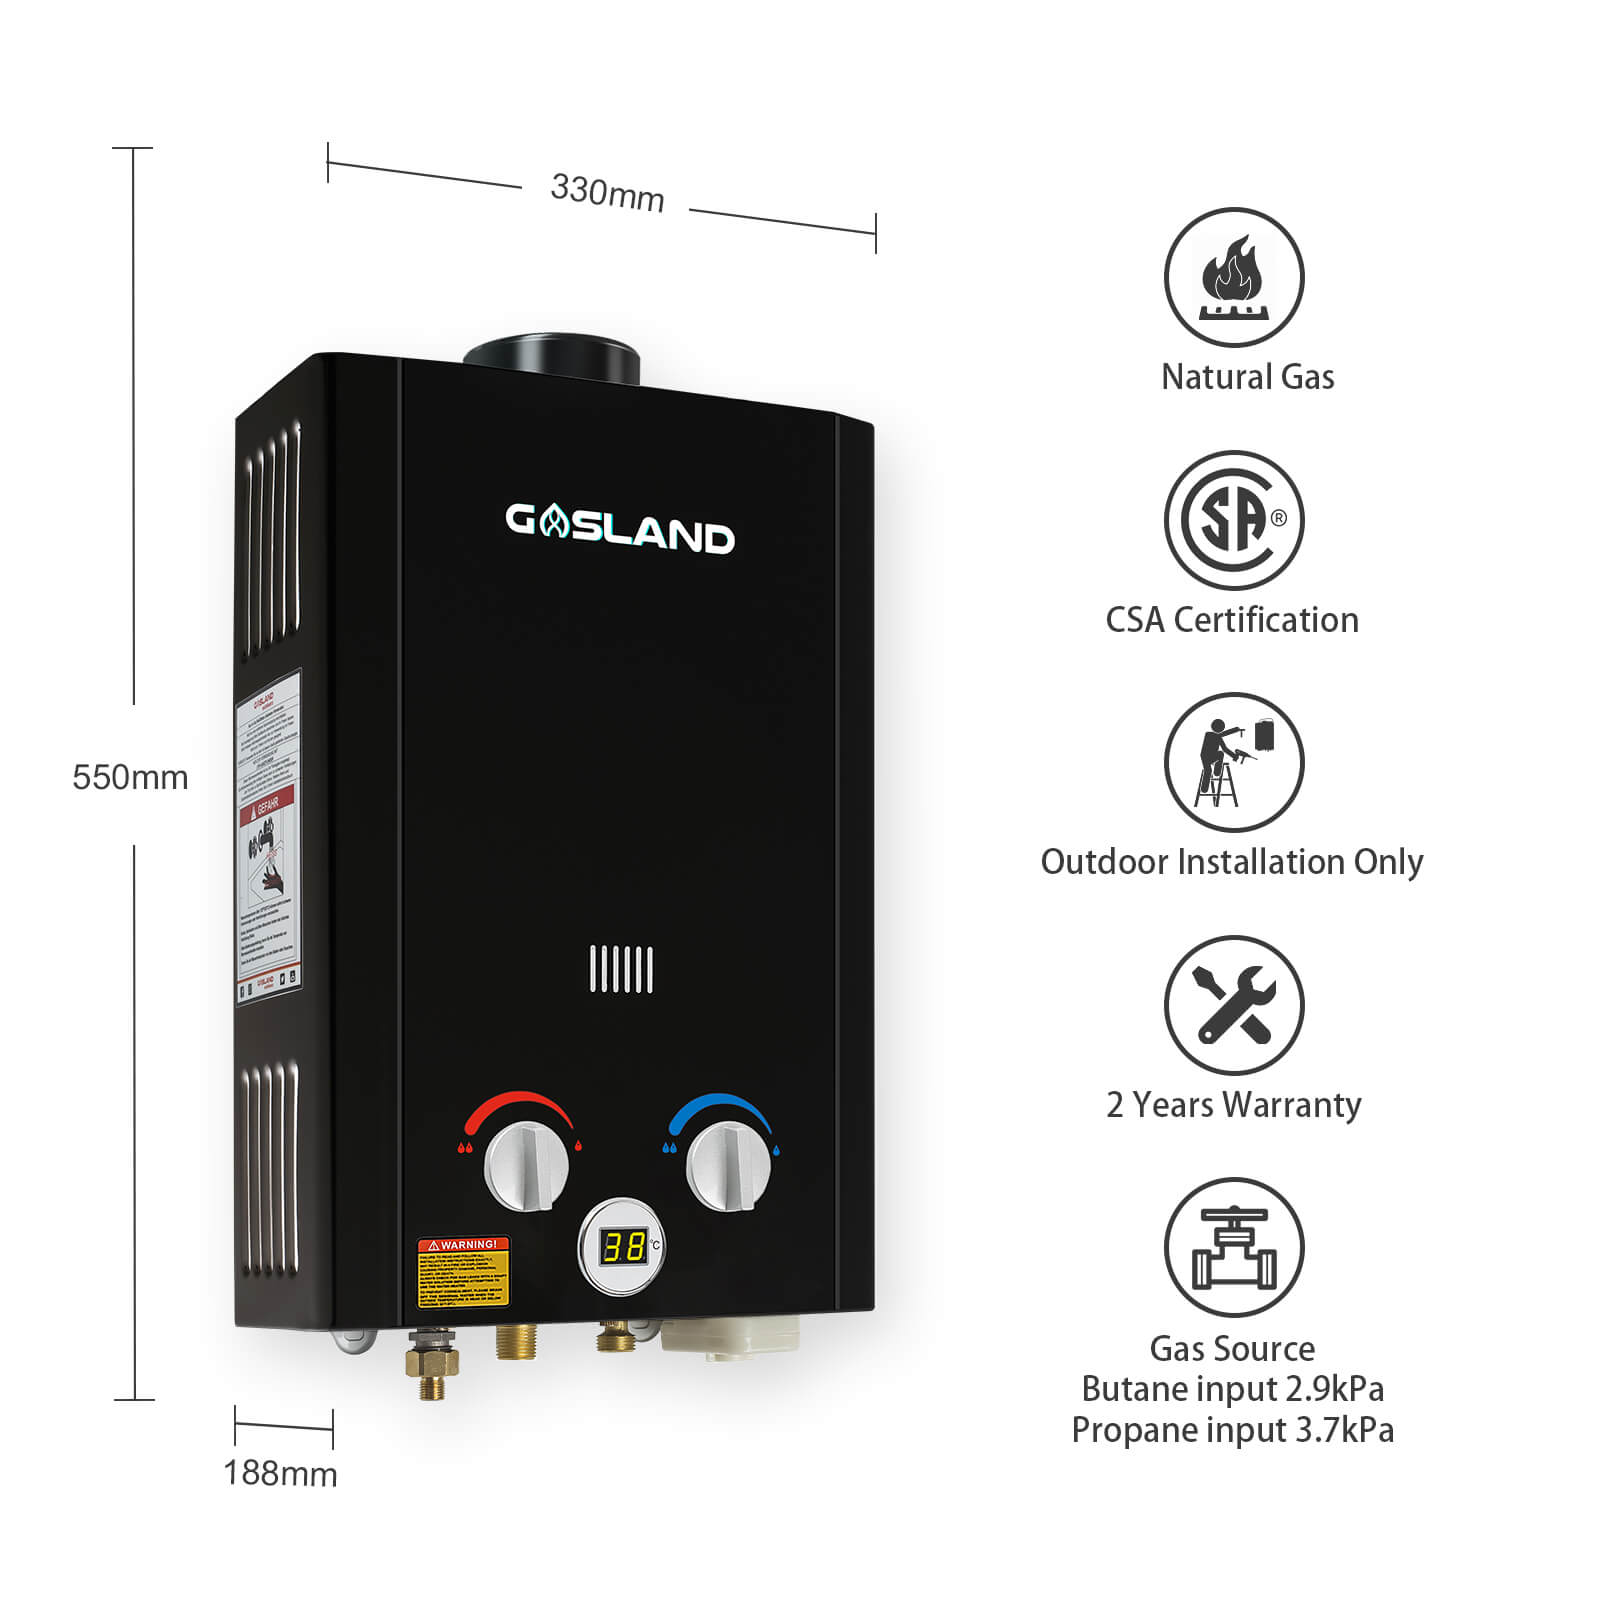 GASLAND BE264B 10L Gas Water Heater, Outdoor Tankless Hot Shower System with Digital Display, Instant LPG Water Boiler for Campervan Shower Road Trip Hot Tap Lpg Shower